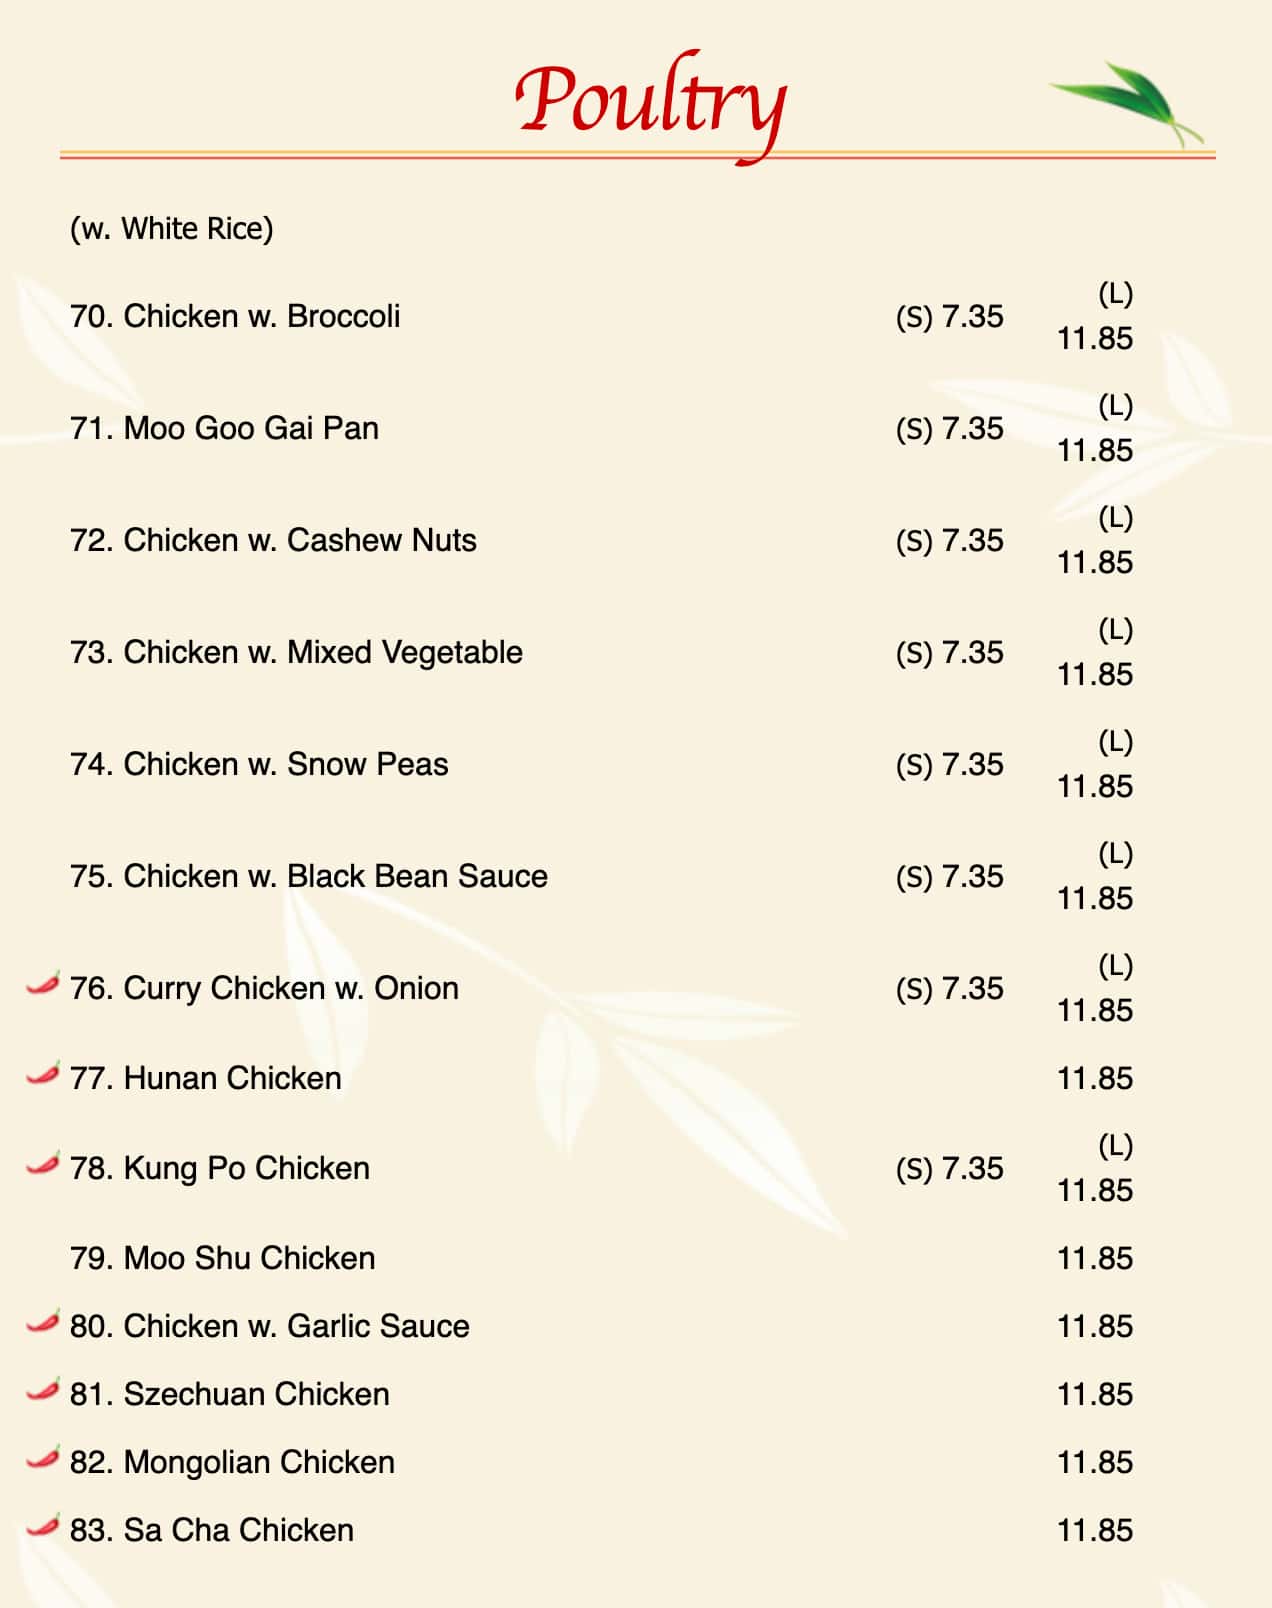 Golden City Chinese Restaurant Poultry Menu